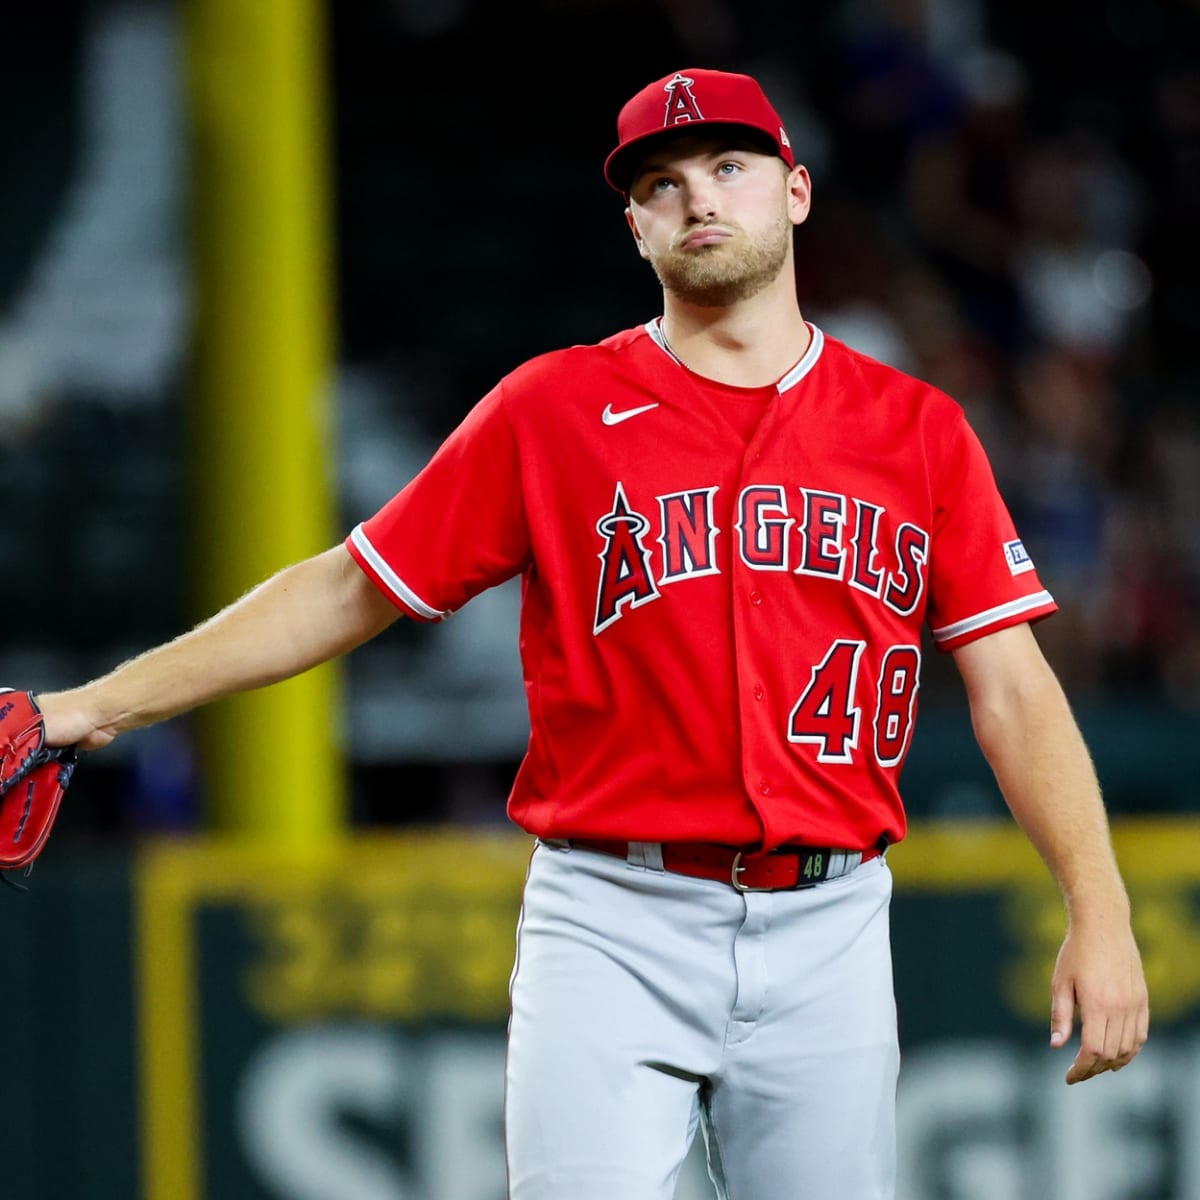 The Rangers mash vs. left-handed pitching, but Angels' Reid Detmers gave  them issues